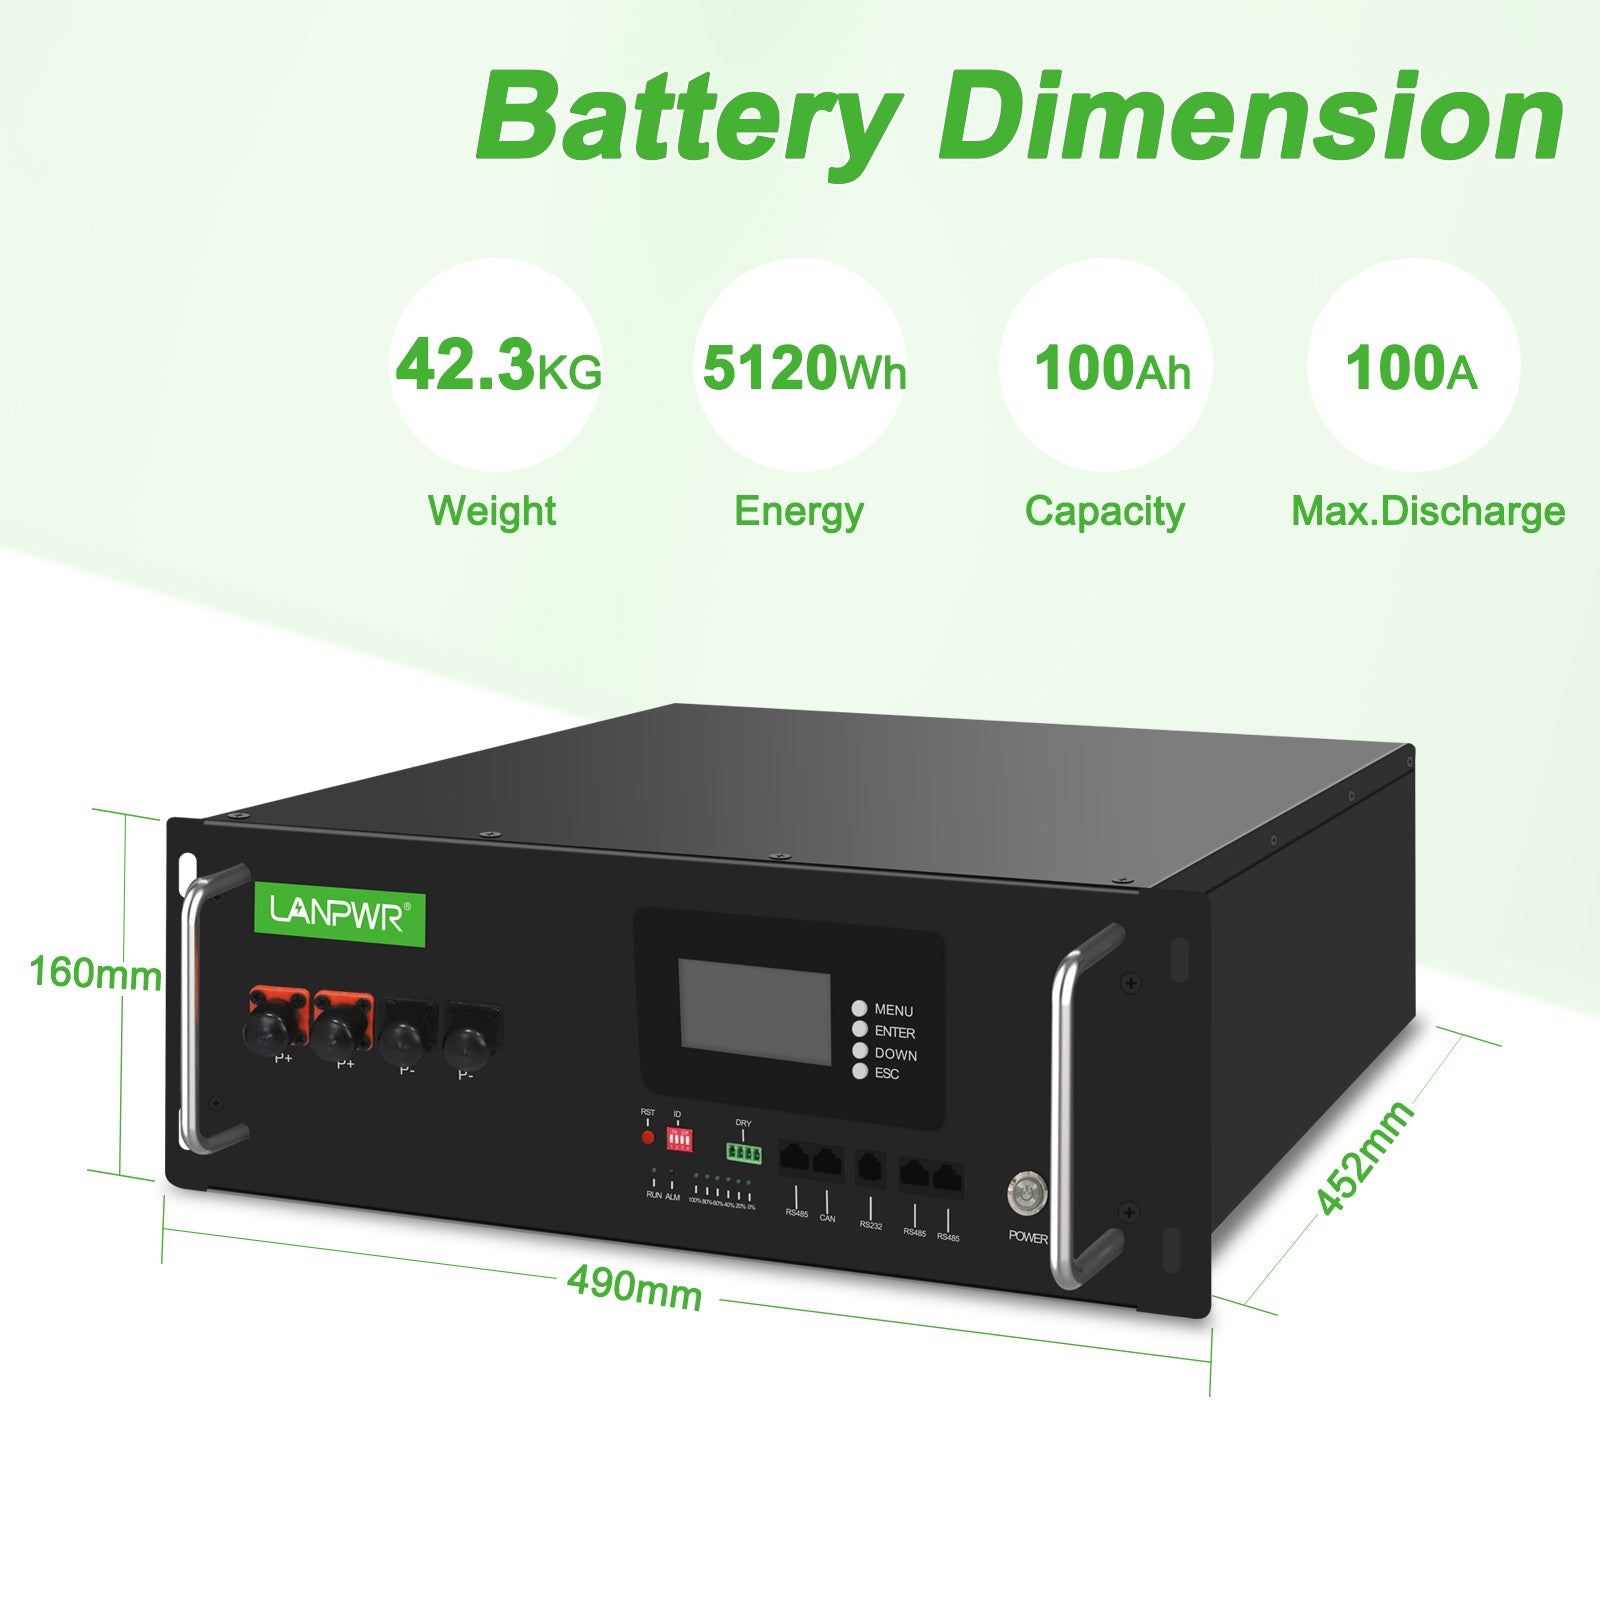 LANPWR 51.2V 100Ah LiFePO4 Lithium Battery with 16 cells, Built-In 100A BMS, Max. 5120W Energy